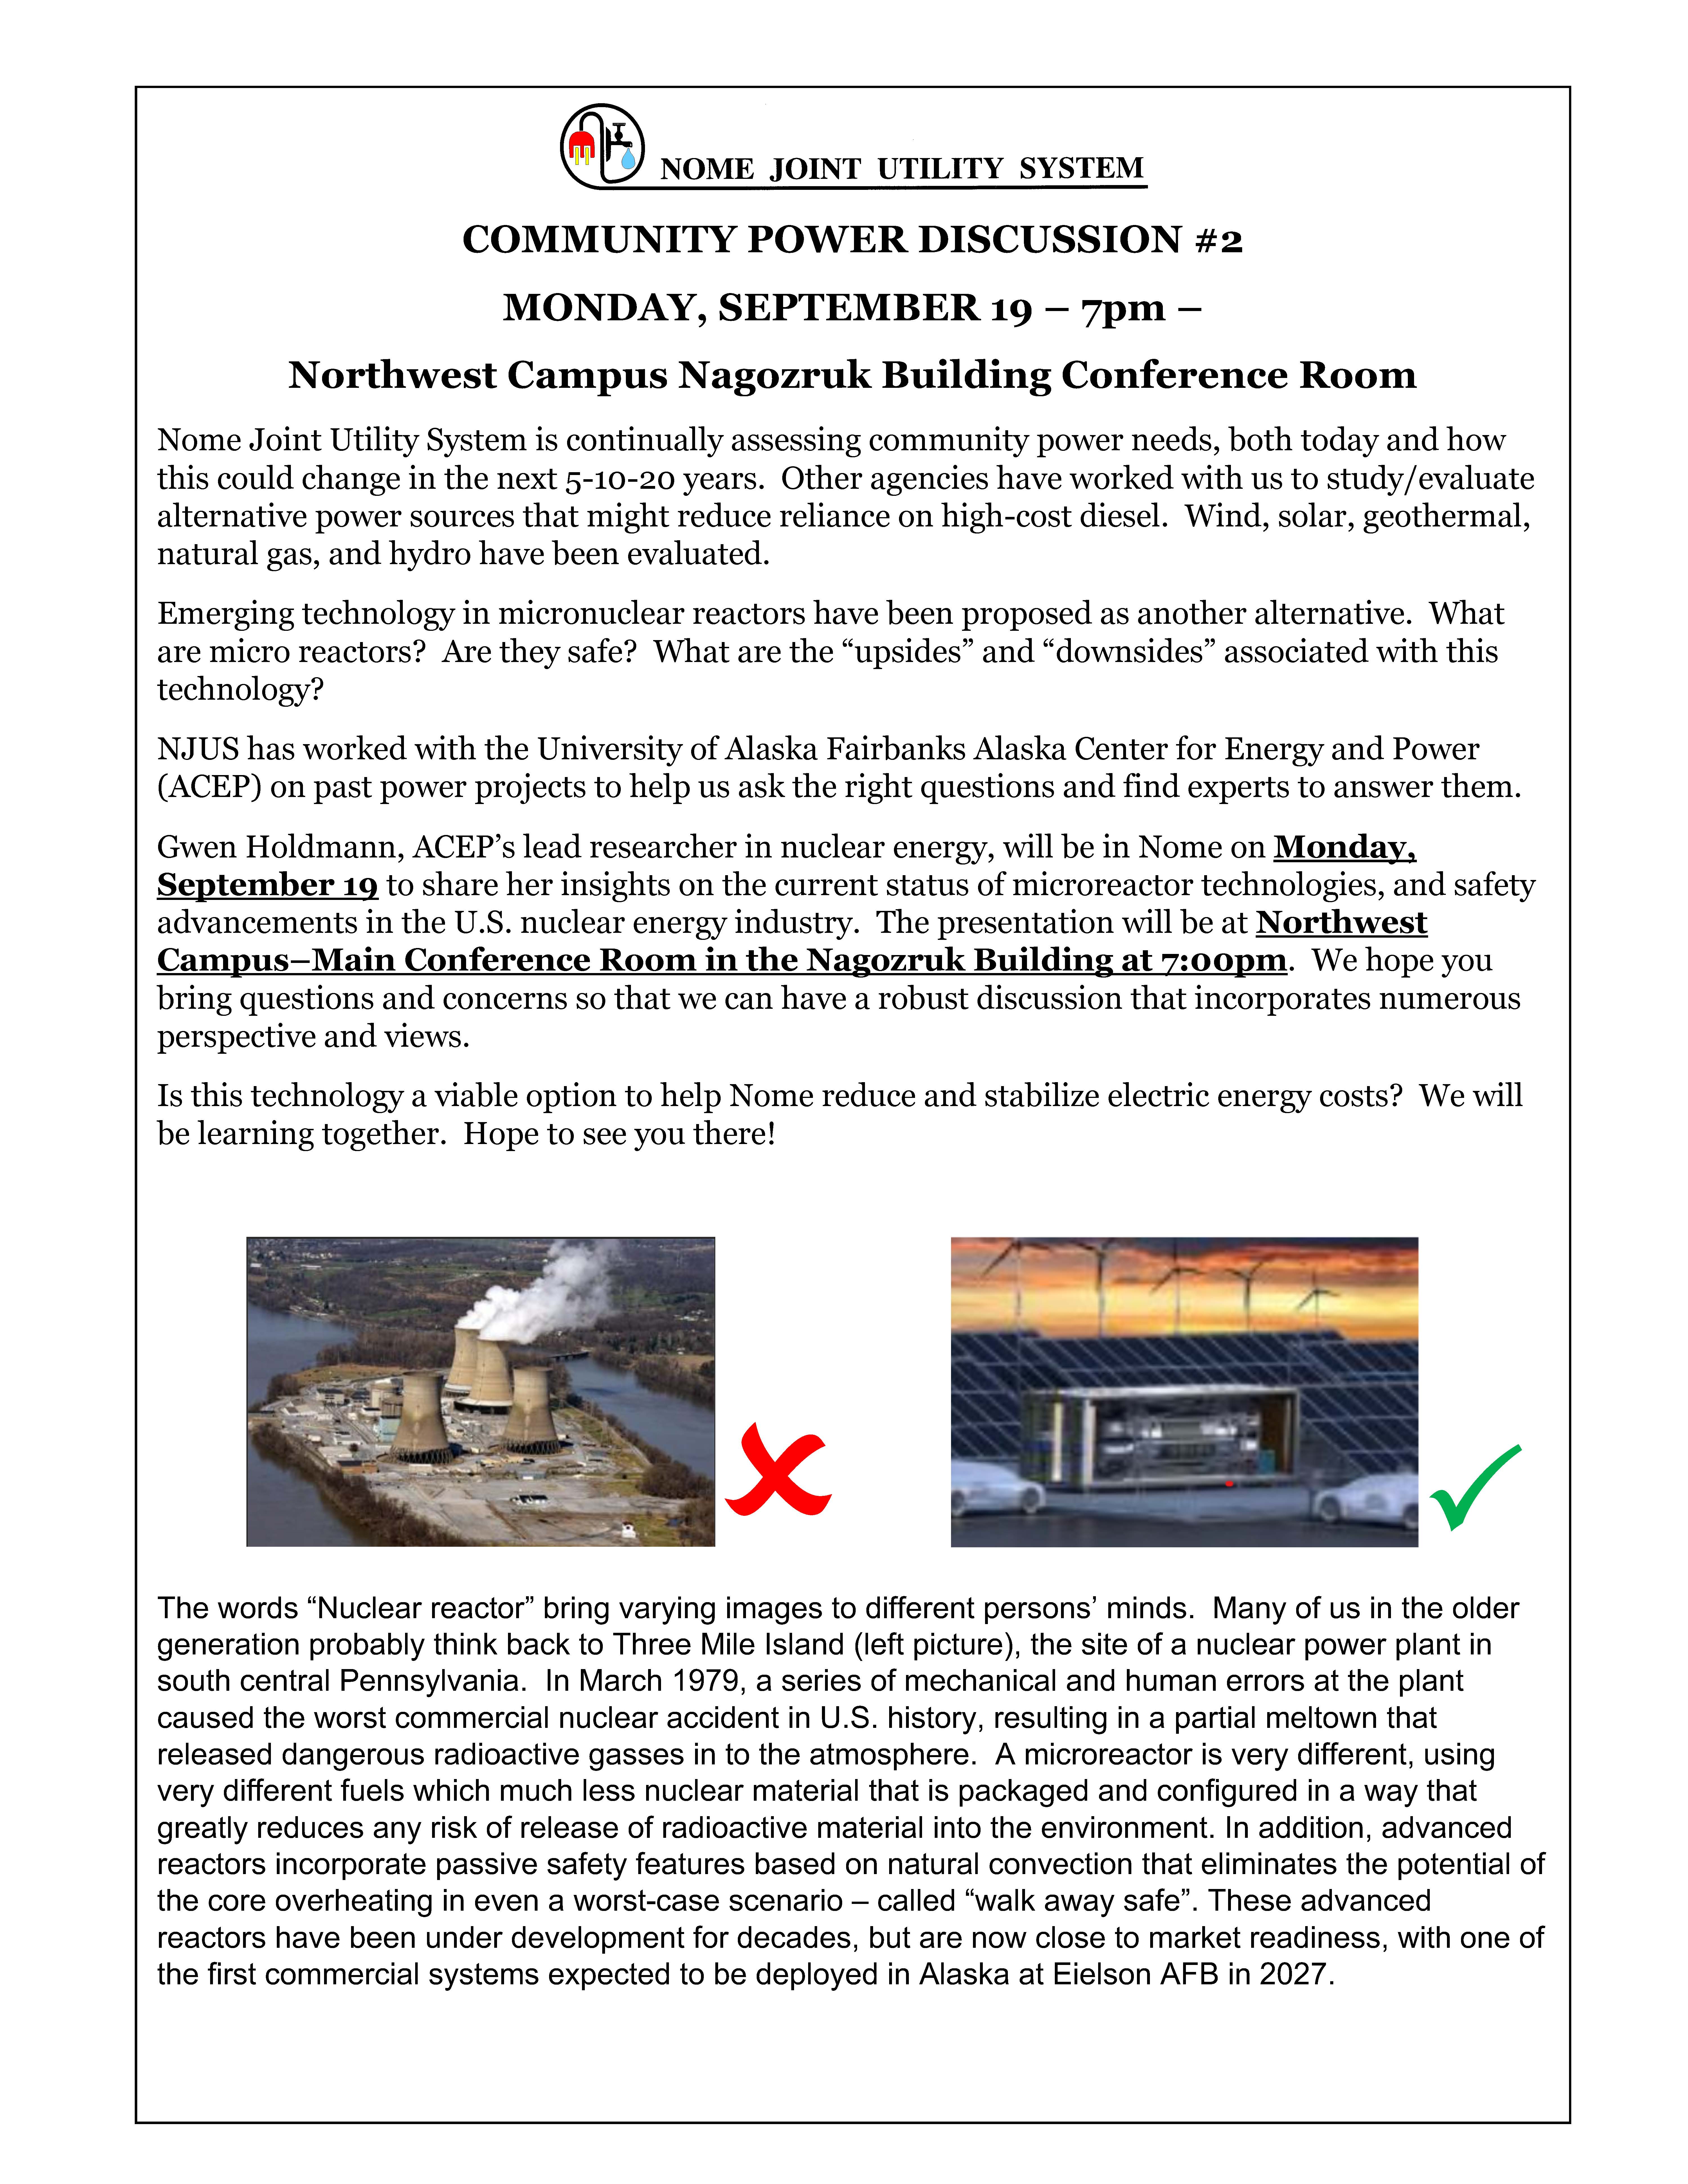 Join Nome Joint Utilities in a Community Power Discussion on Micro-Reactors